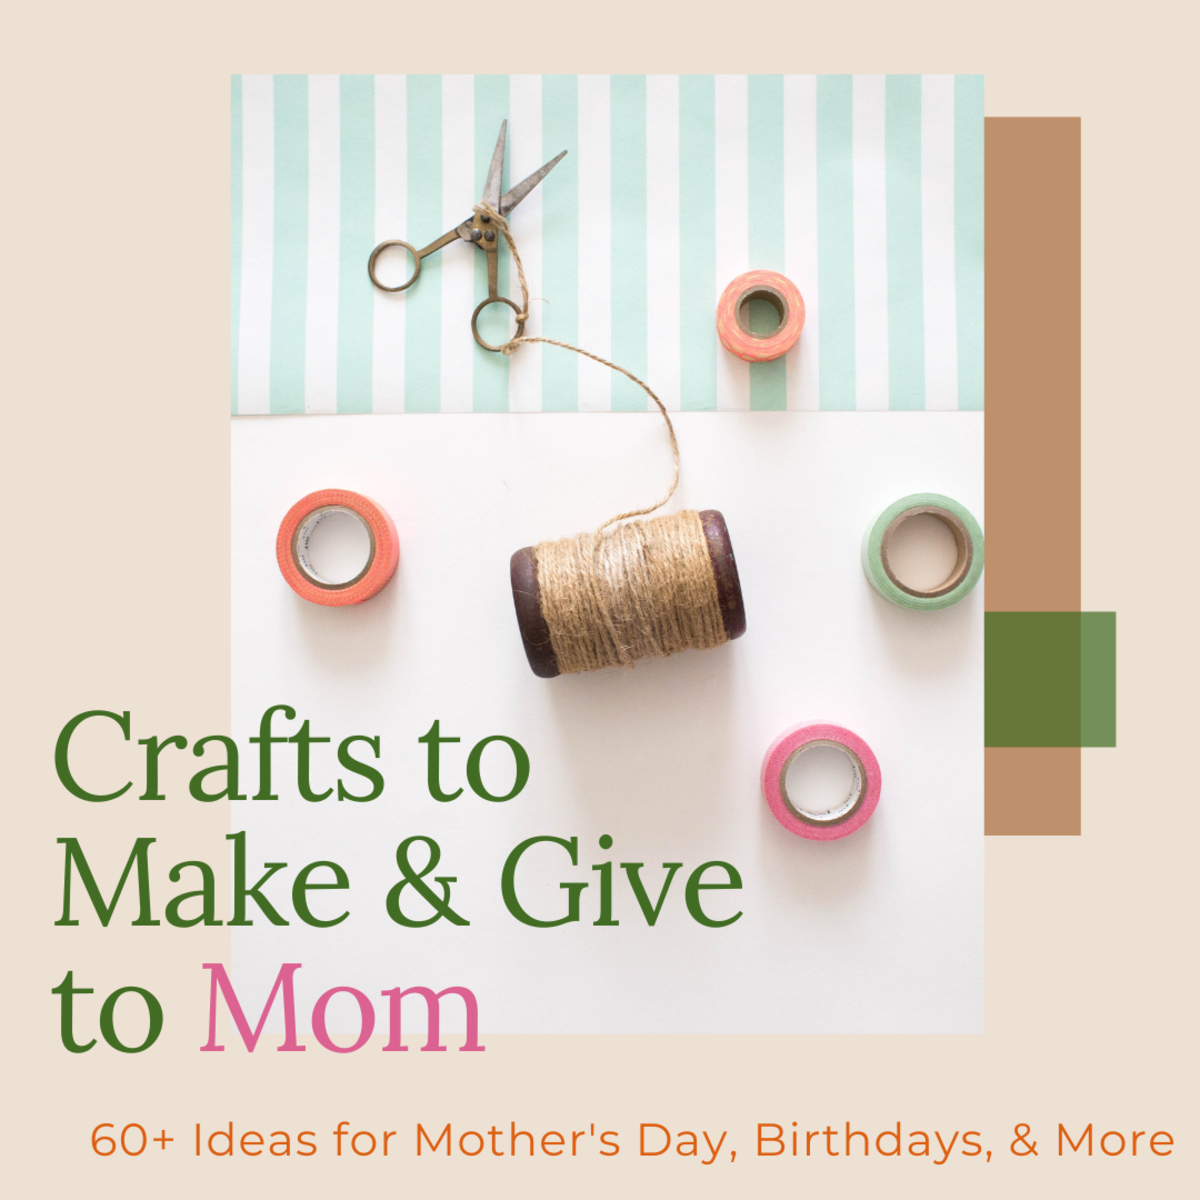 Find some creative inspiration and make something for your mom or grandma.